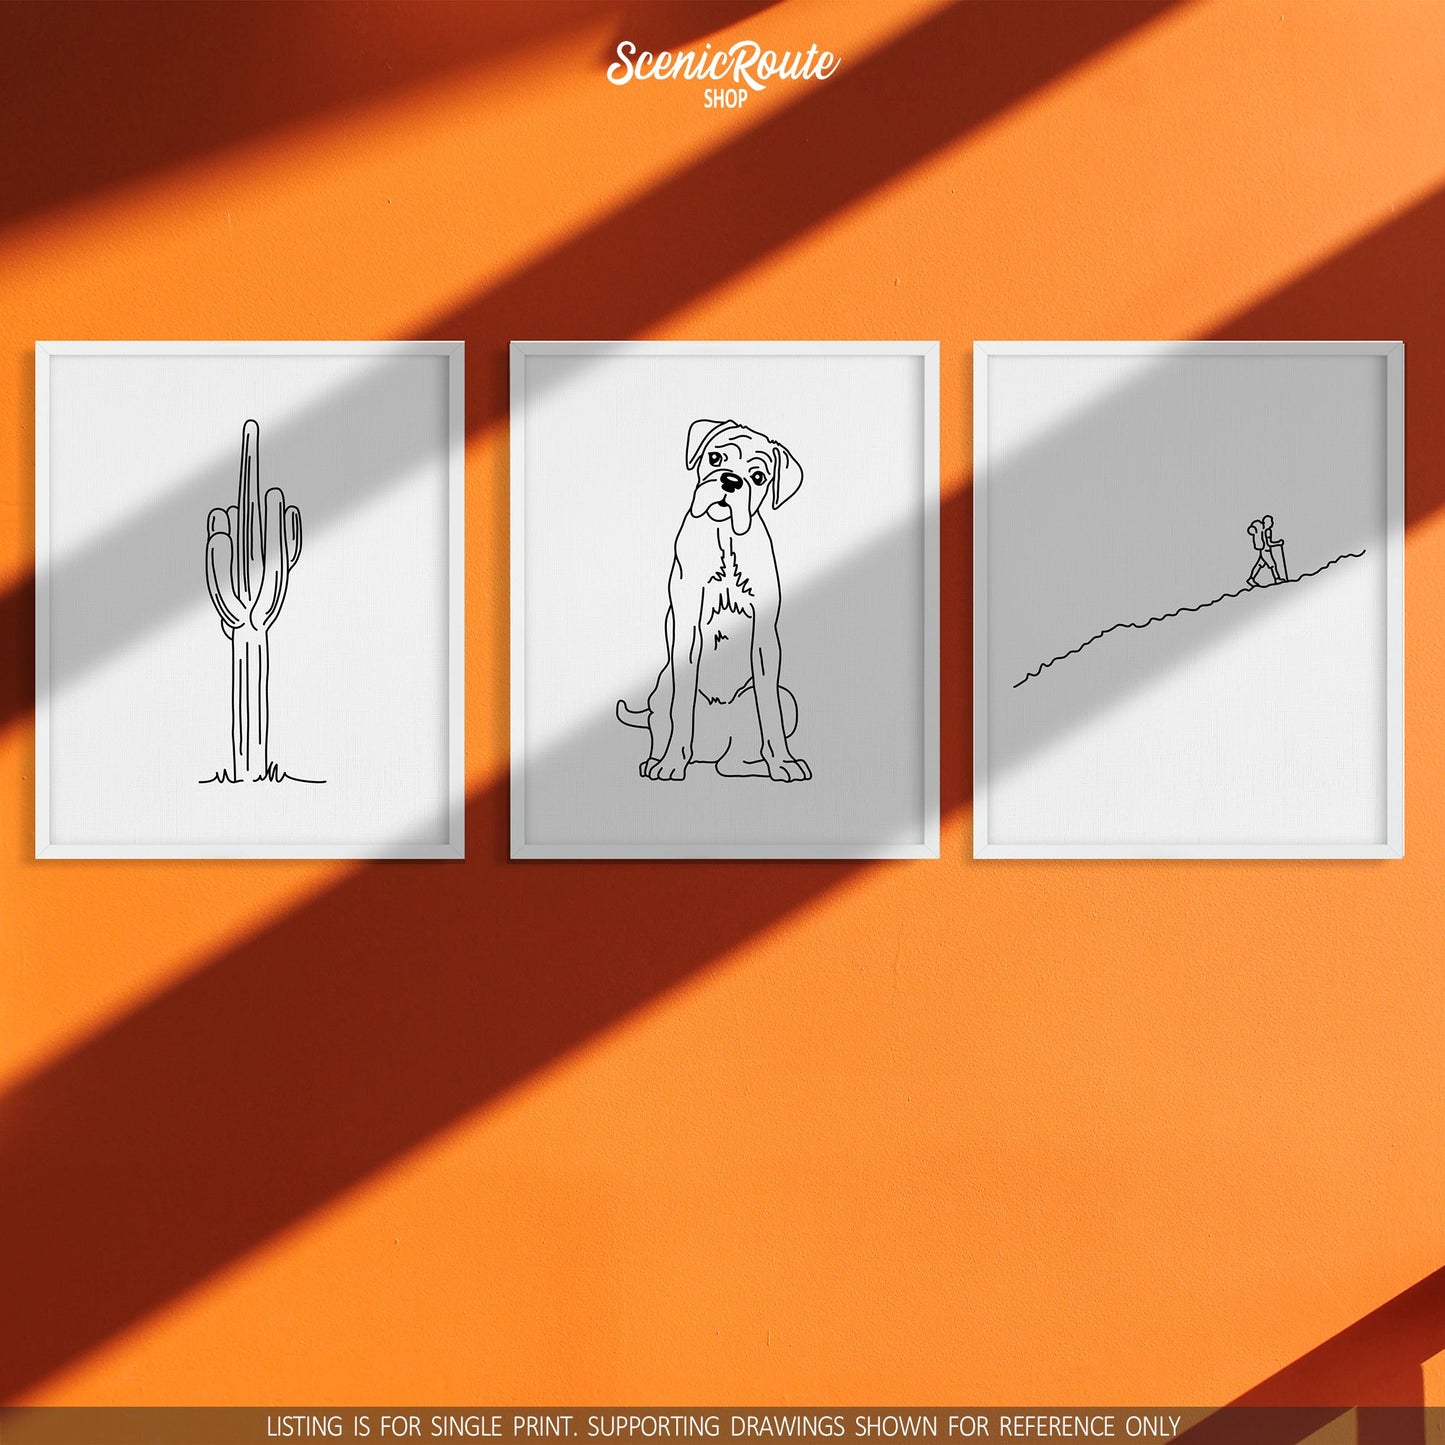 A group of three framed drawings on an orange wall with sun shadows. The line art drawings include a Saguaro Cactus, a Boxer dog, and a person Hiking.